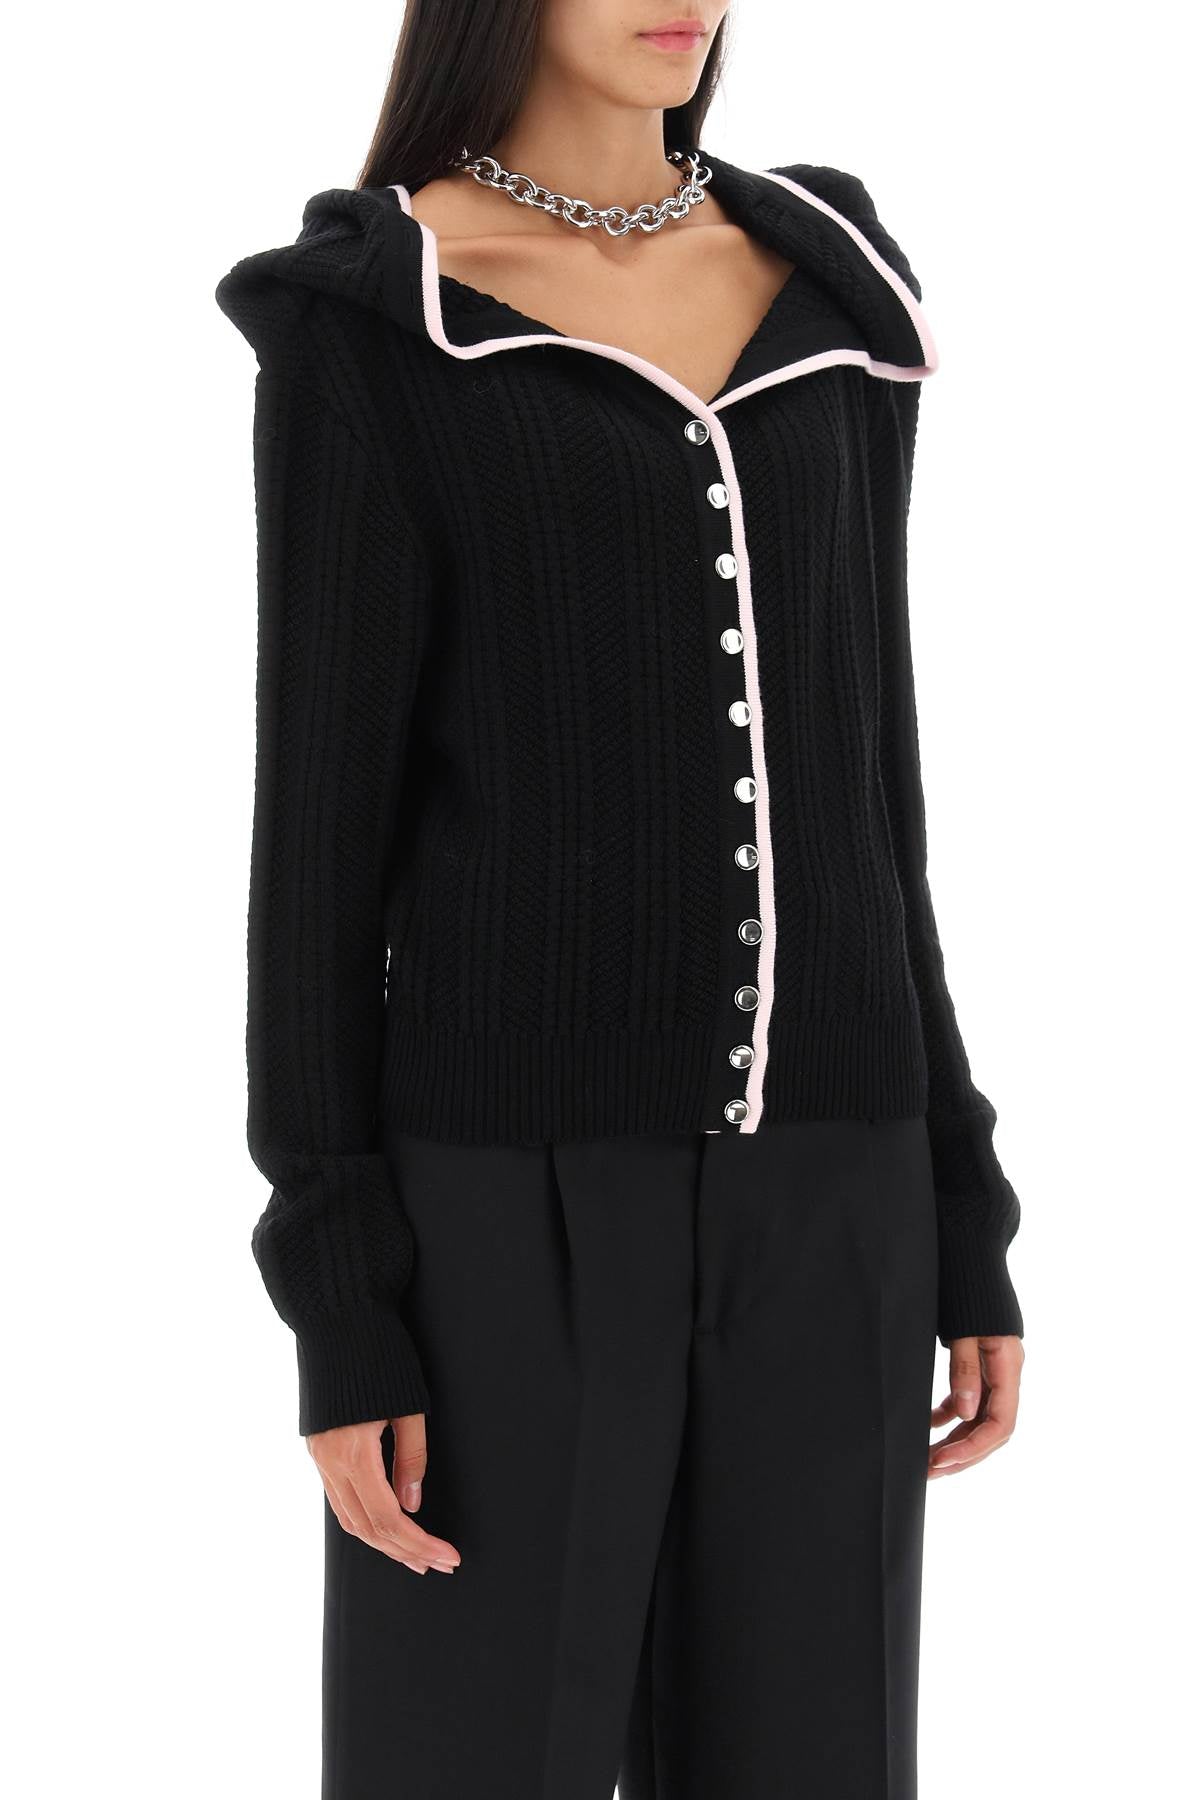 Y/PROJECT Black Merino Wool Cardigan with Ruffled Neckline and Chain Necklace for Women